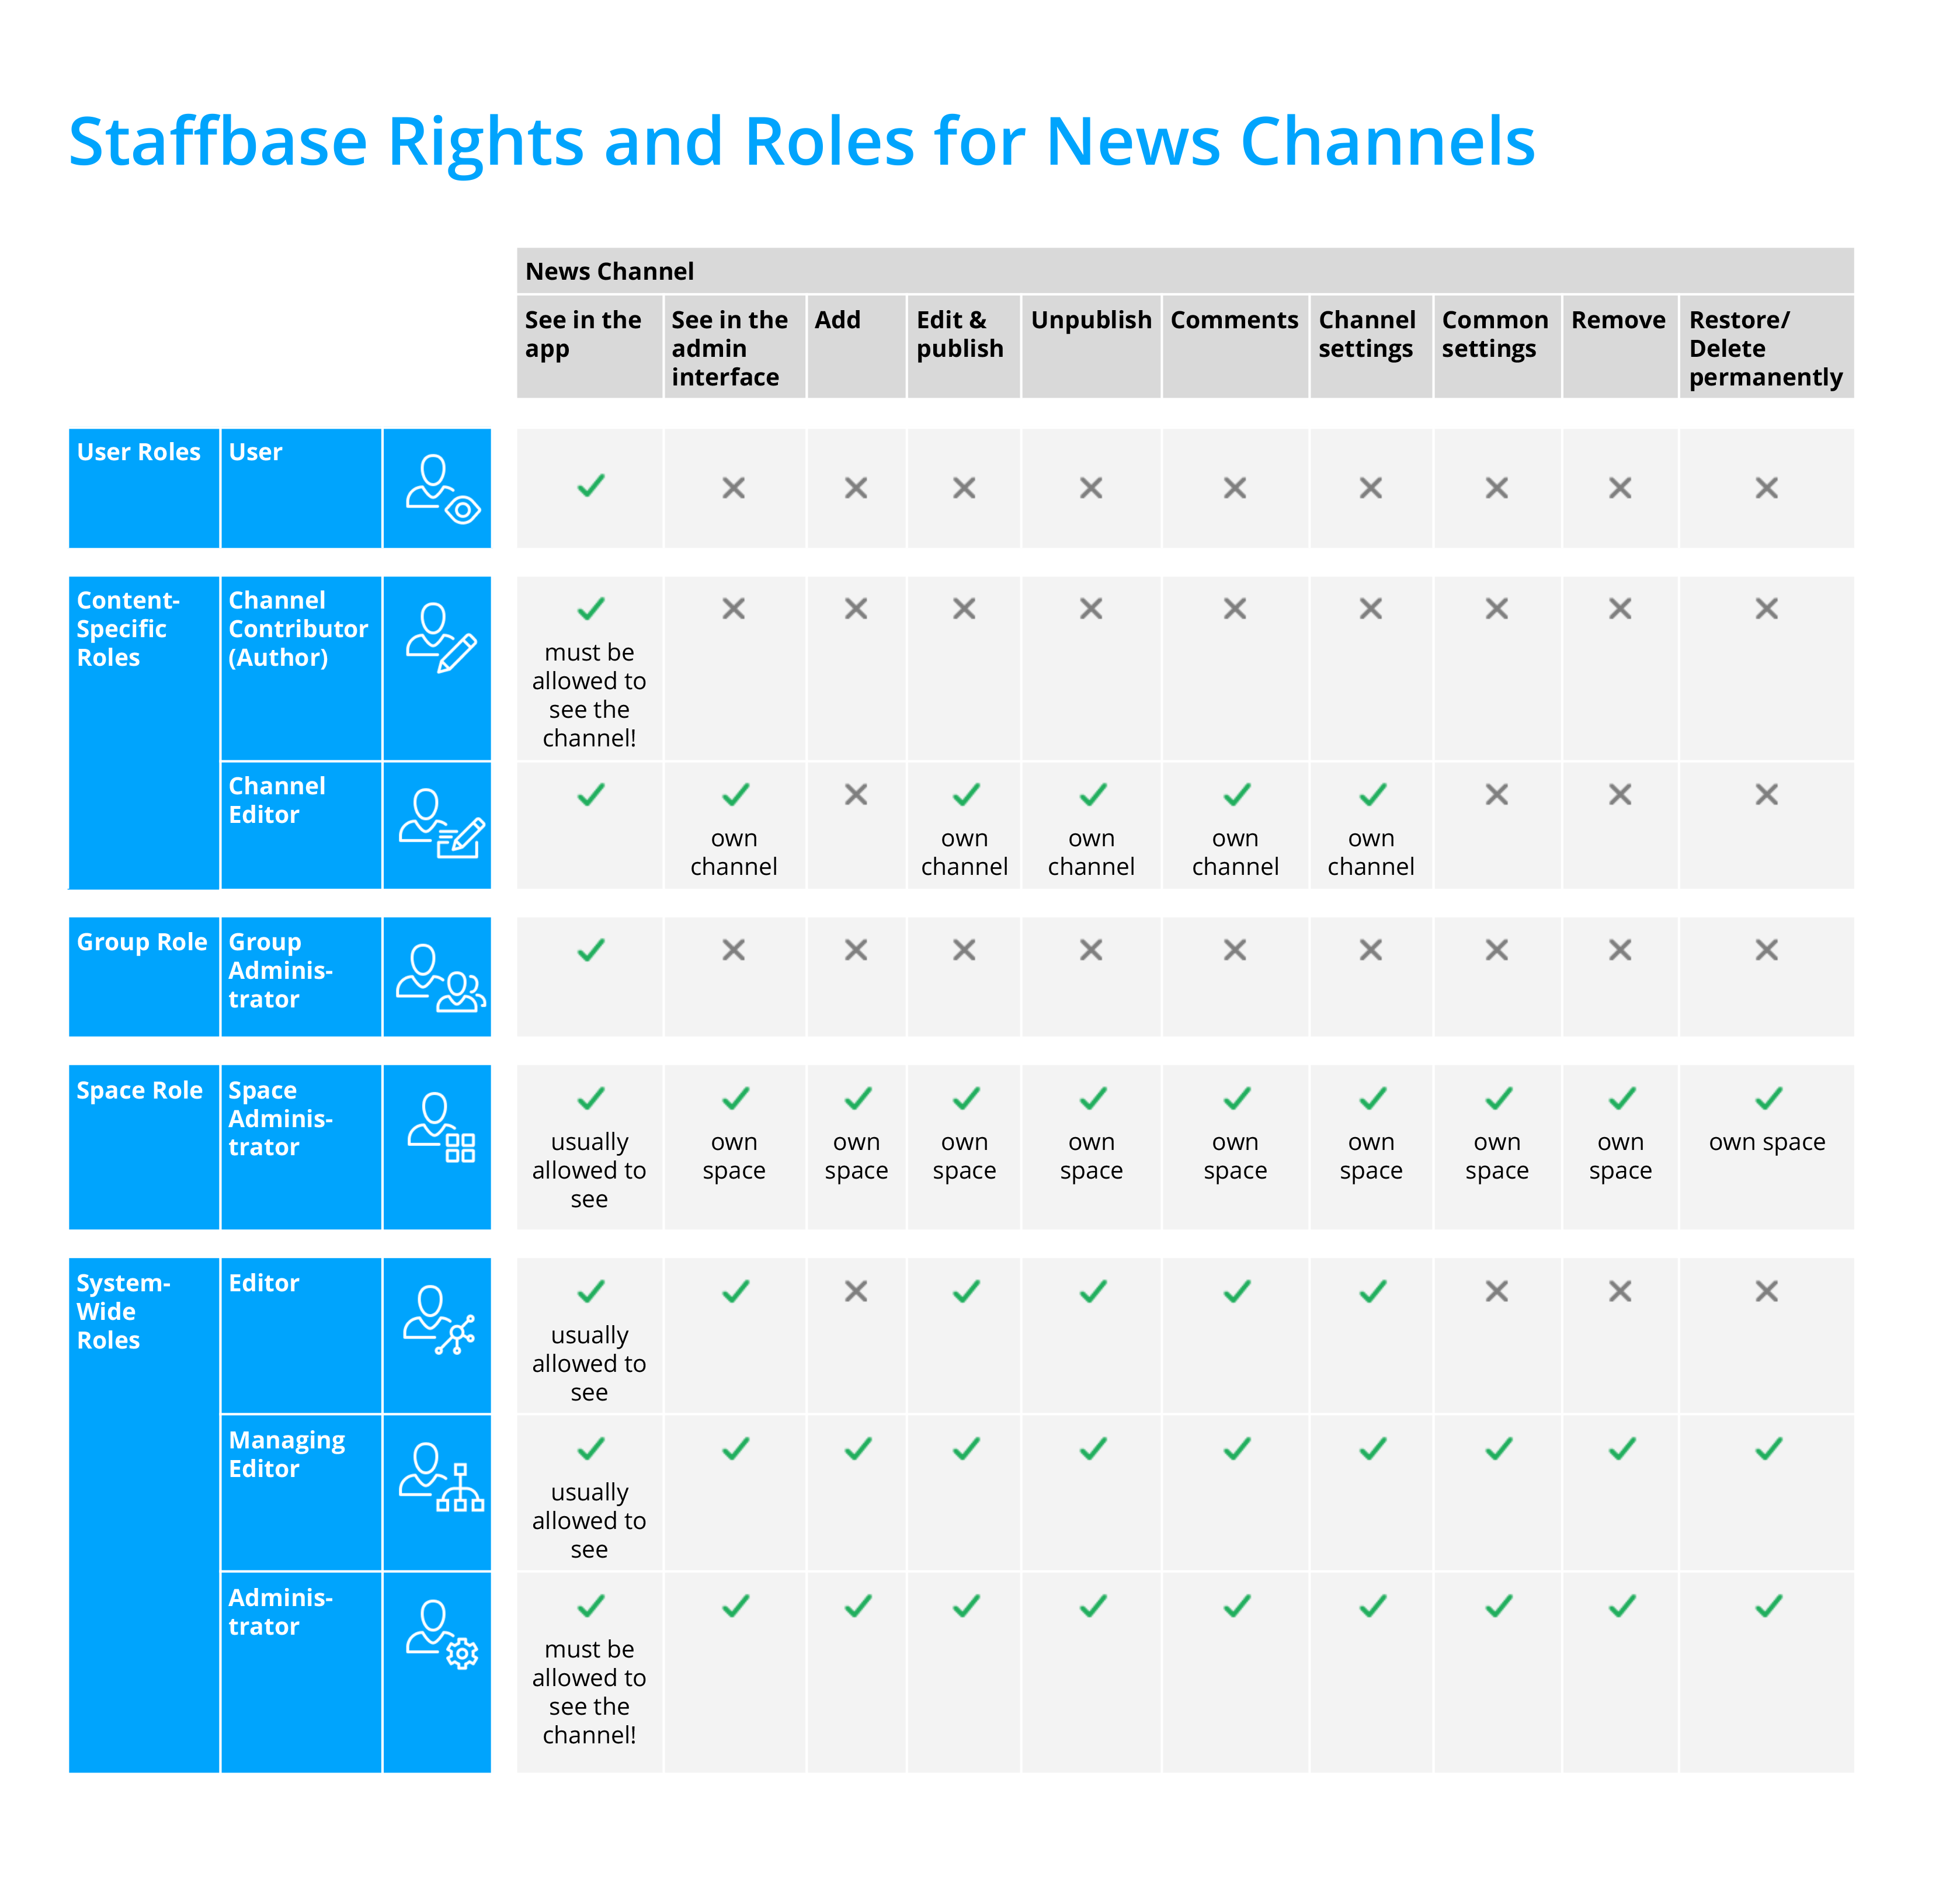 Rights_Roles_News_Channels.png